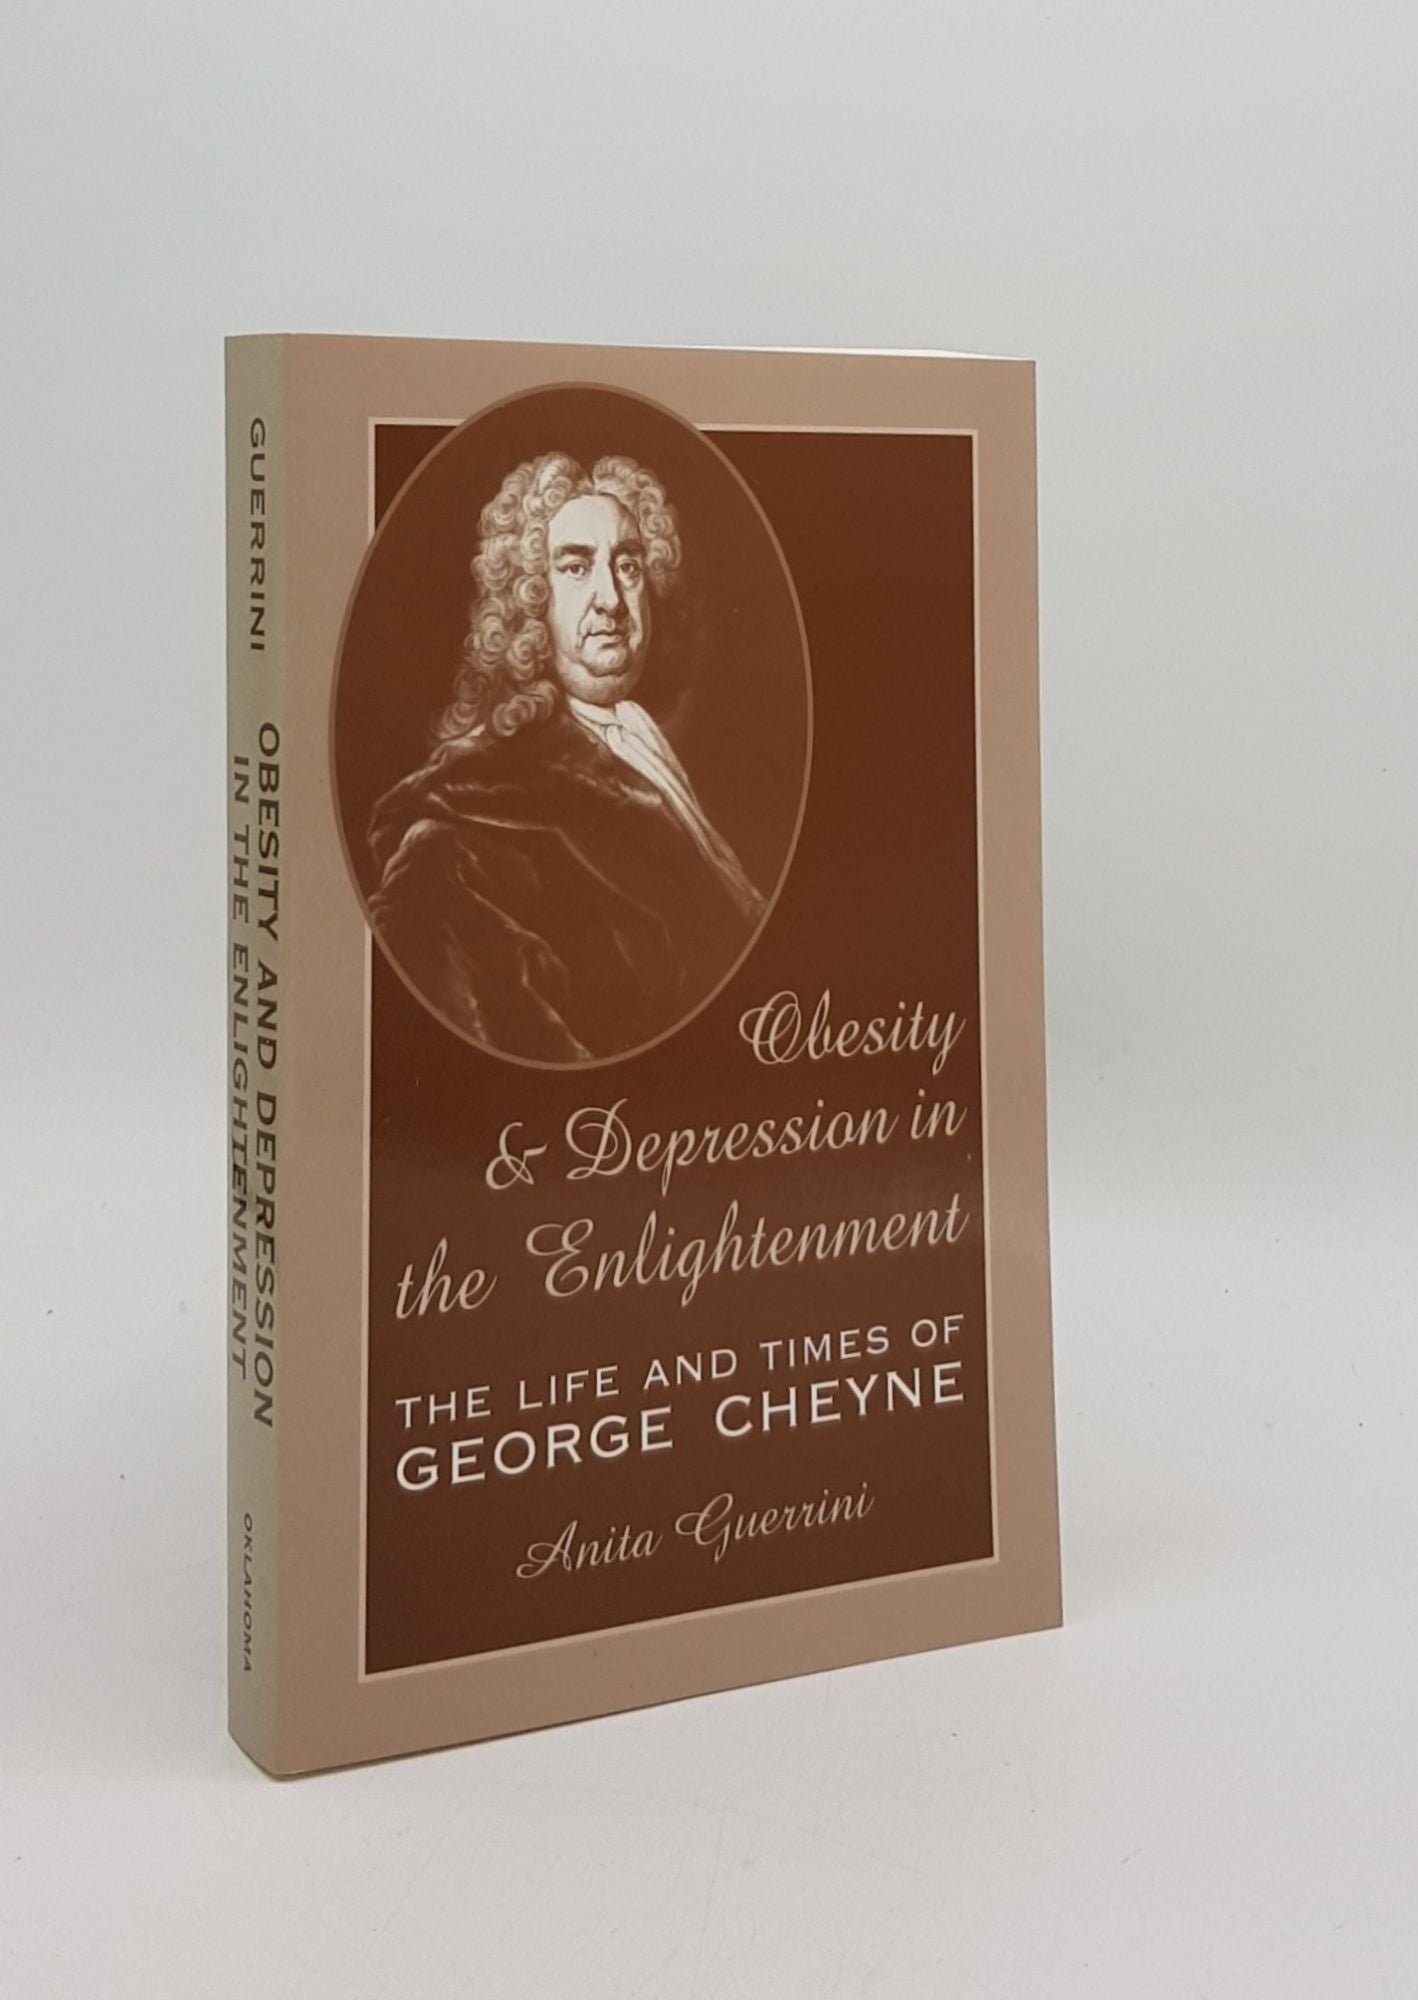 GUERRINI Anita - Obesity and Depression in the Enlightenment the Life and Times of George Cheyne